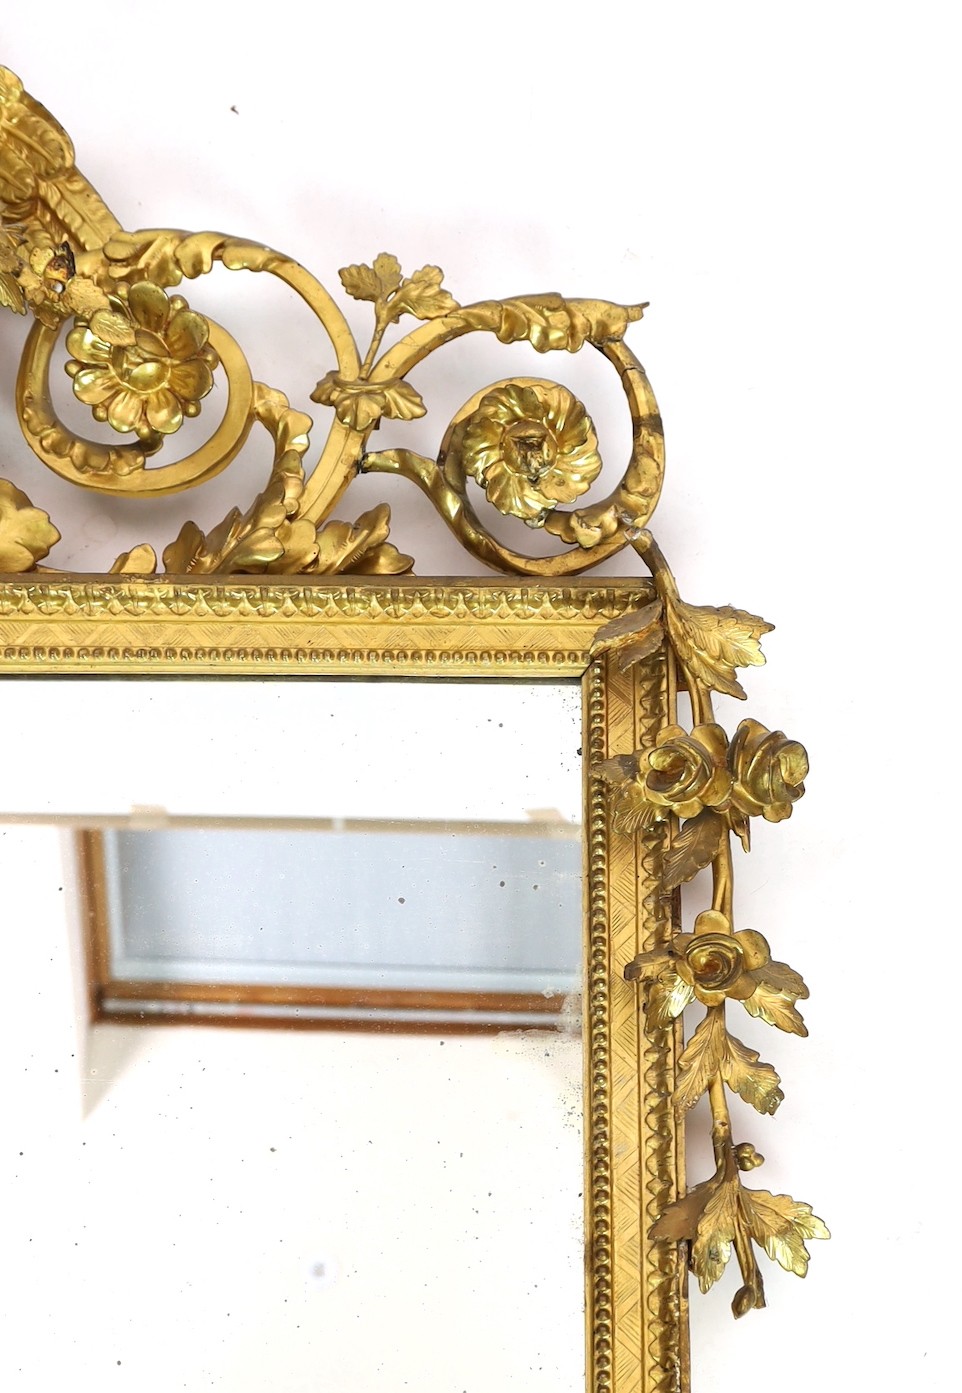 A 19th century century carved giltwood wall mirror, with elaborate ornate eagle and flowering swag - Image 4 of 4